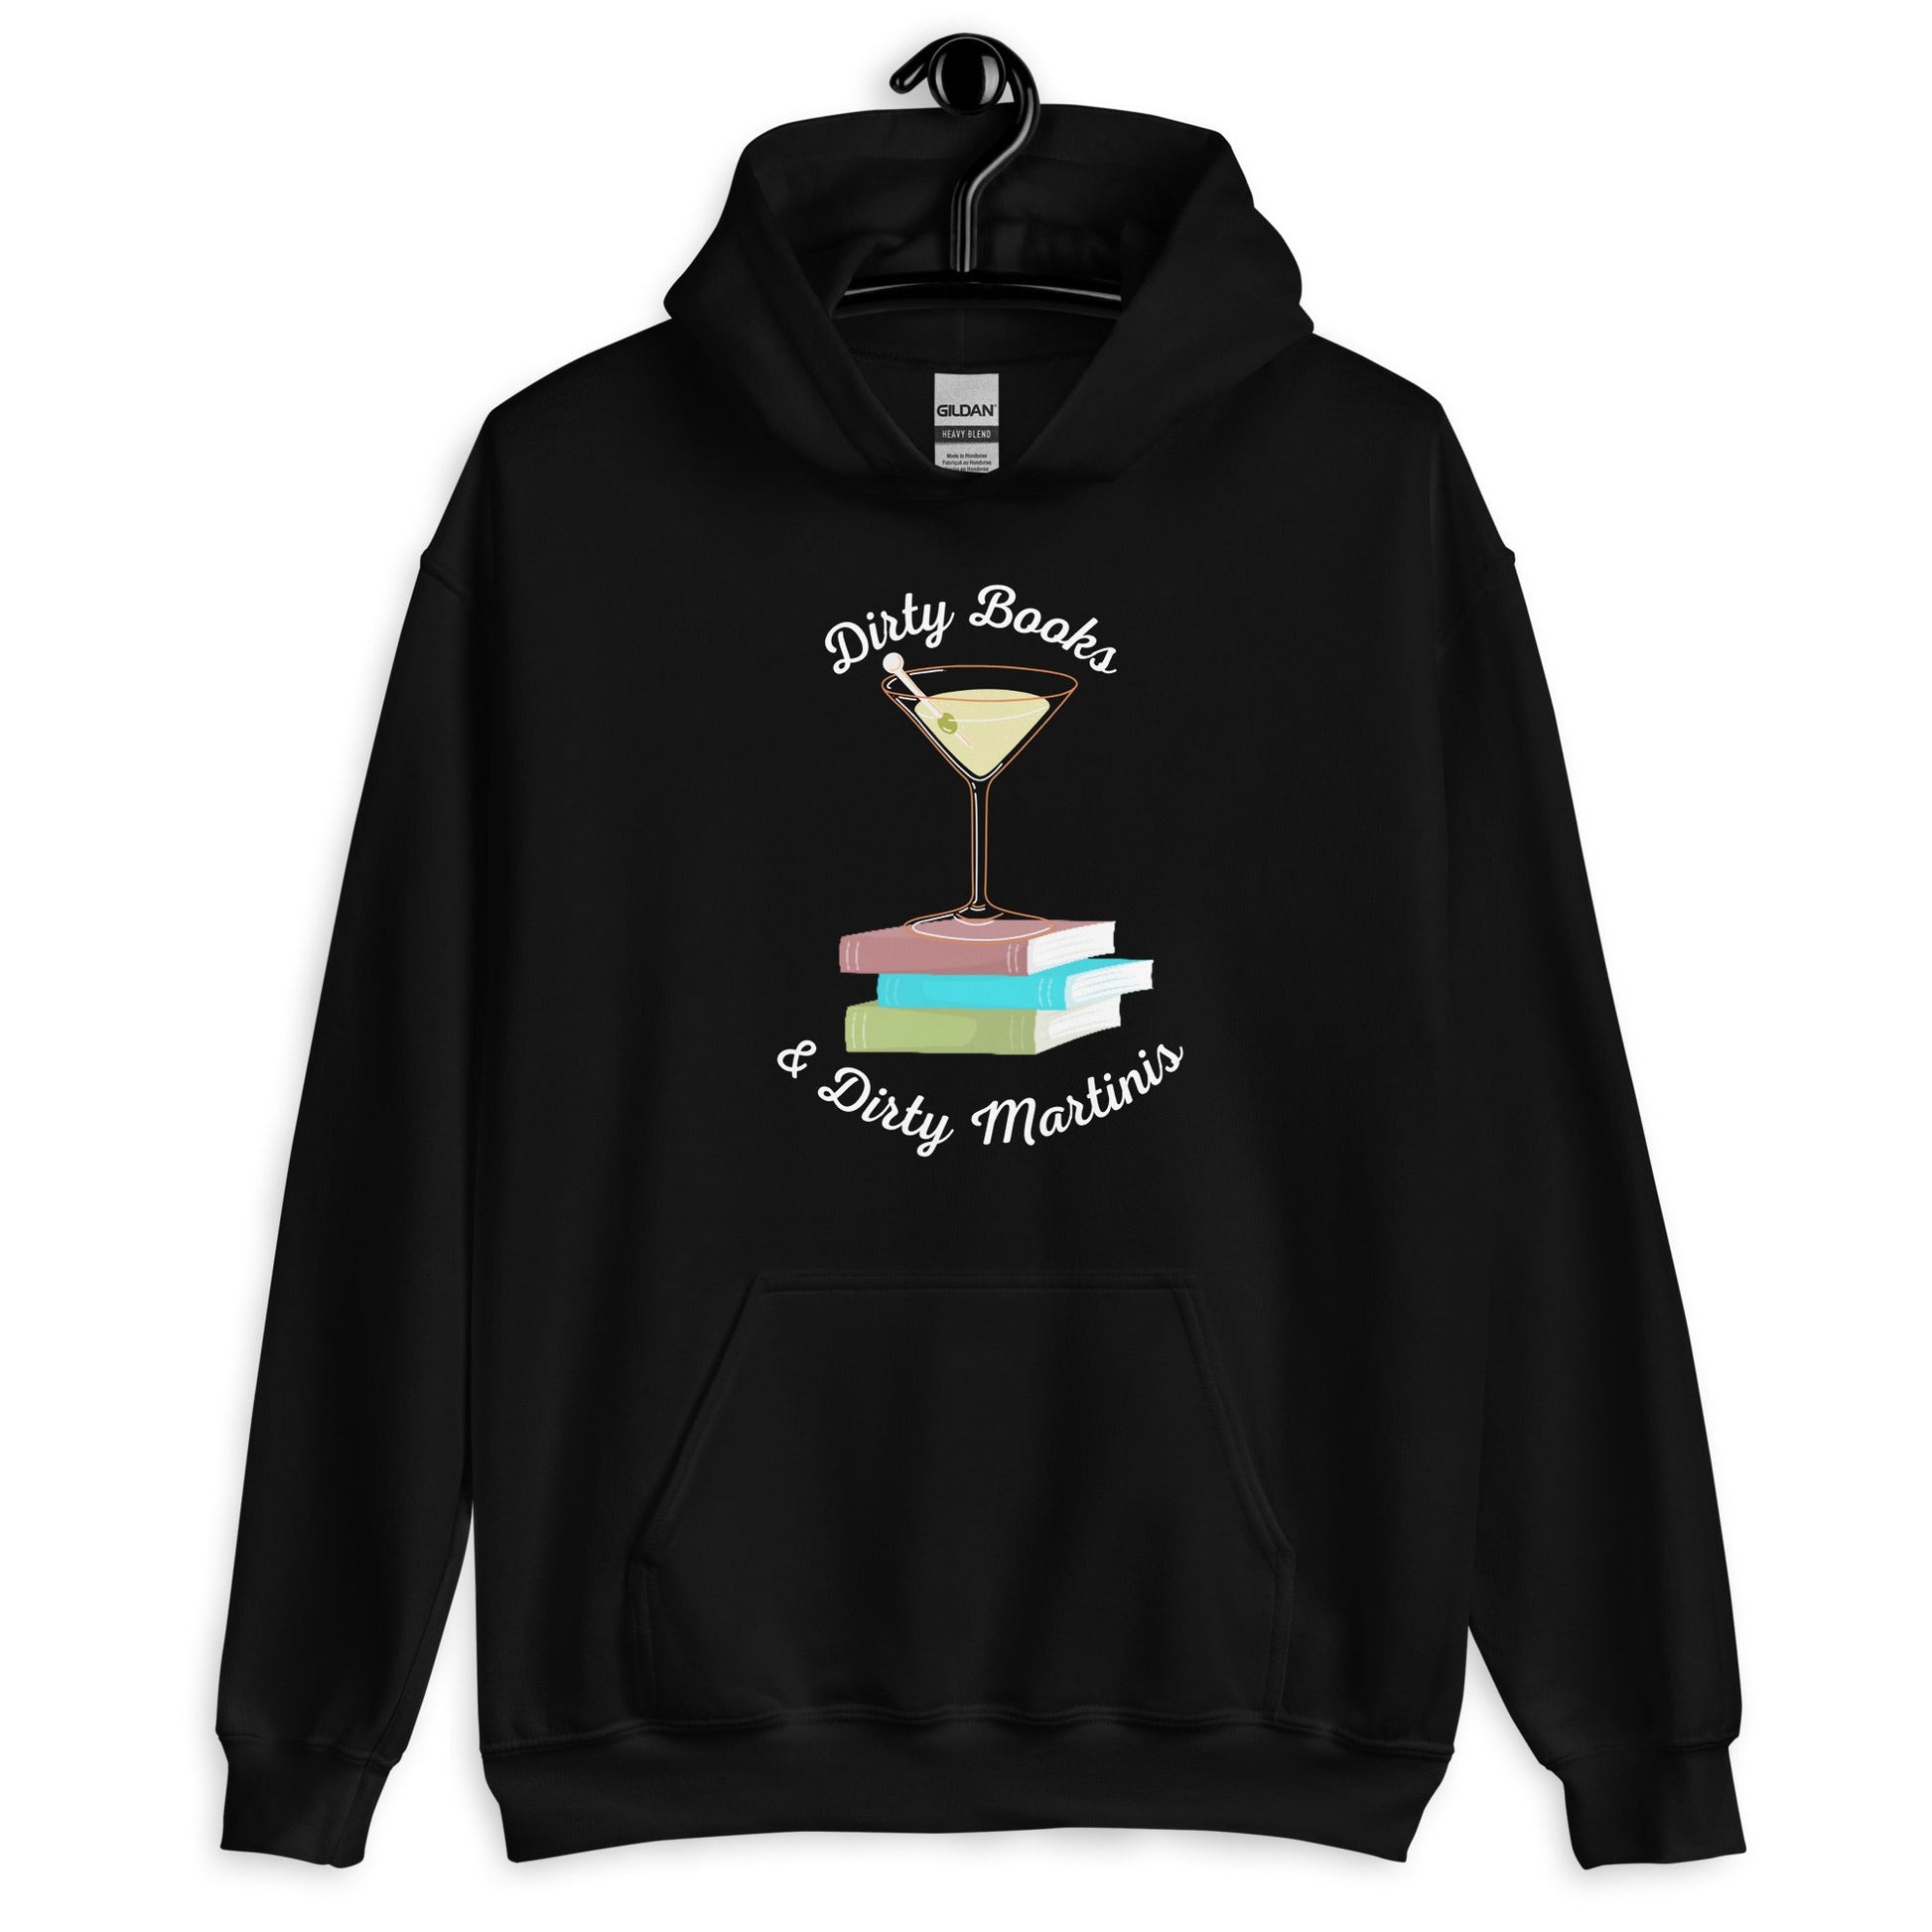 Dirty Books & Dirty Martinis Hoodies - Kindle Crack